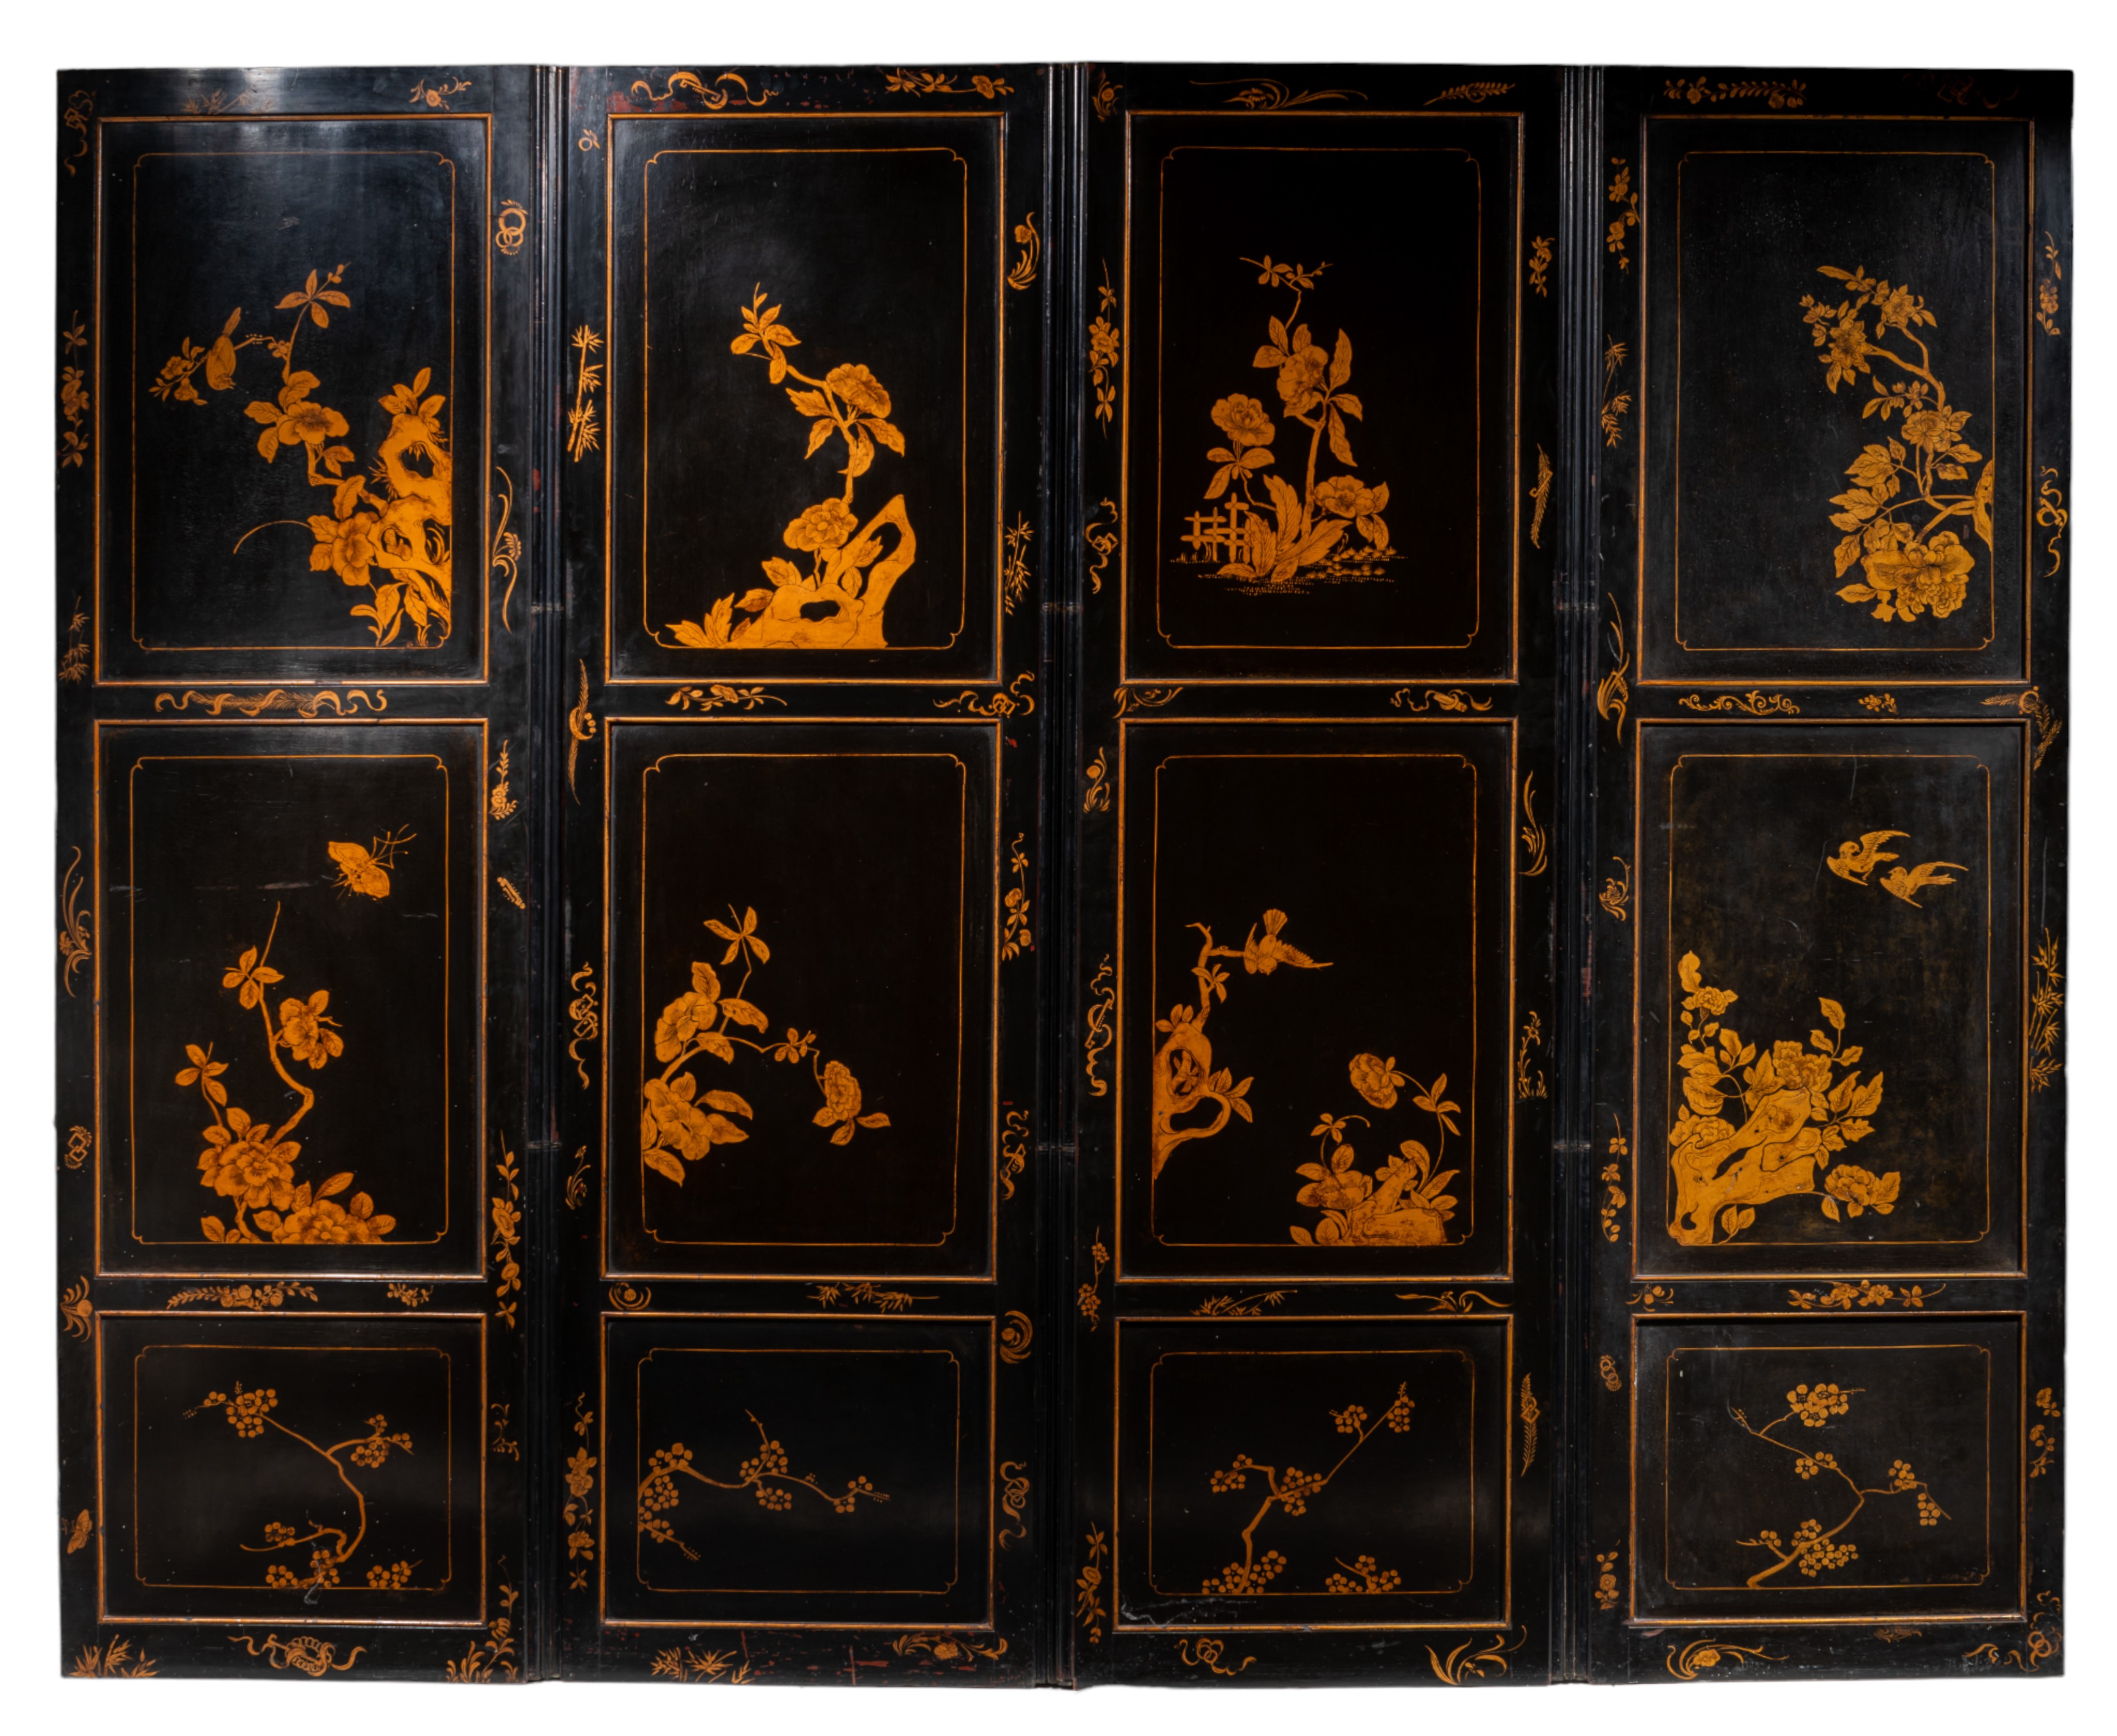 A Chinese gilt and black lacquered four-panel chamber screen, late 19thC, 60 x 198 cm (each panel) - Image 2 of 5